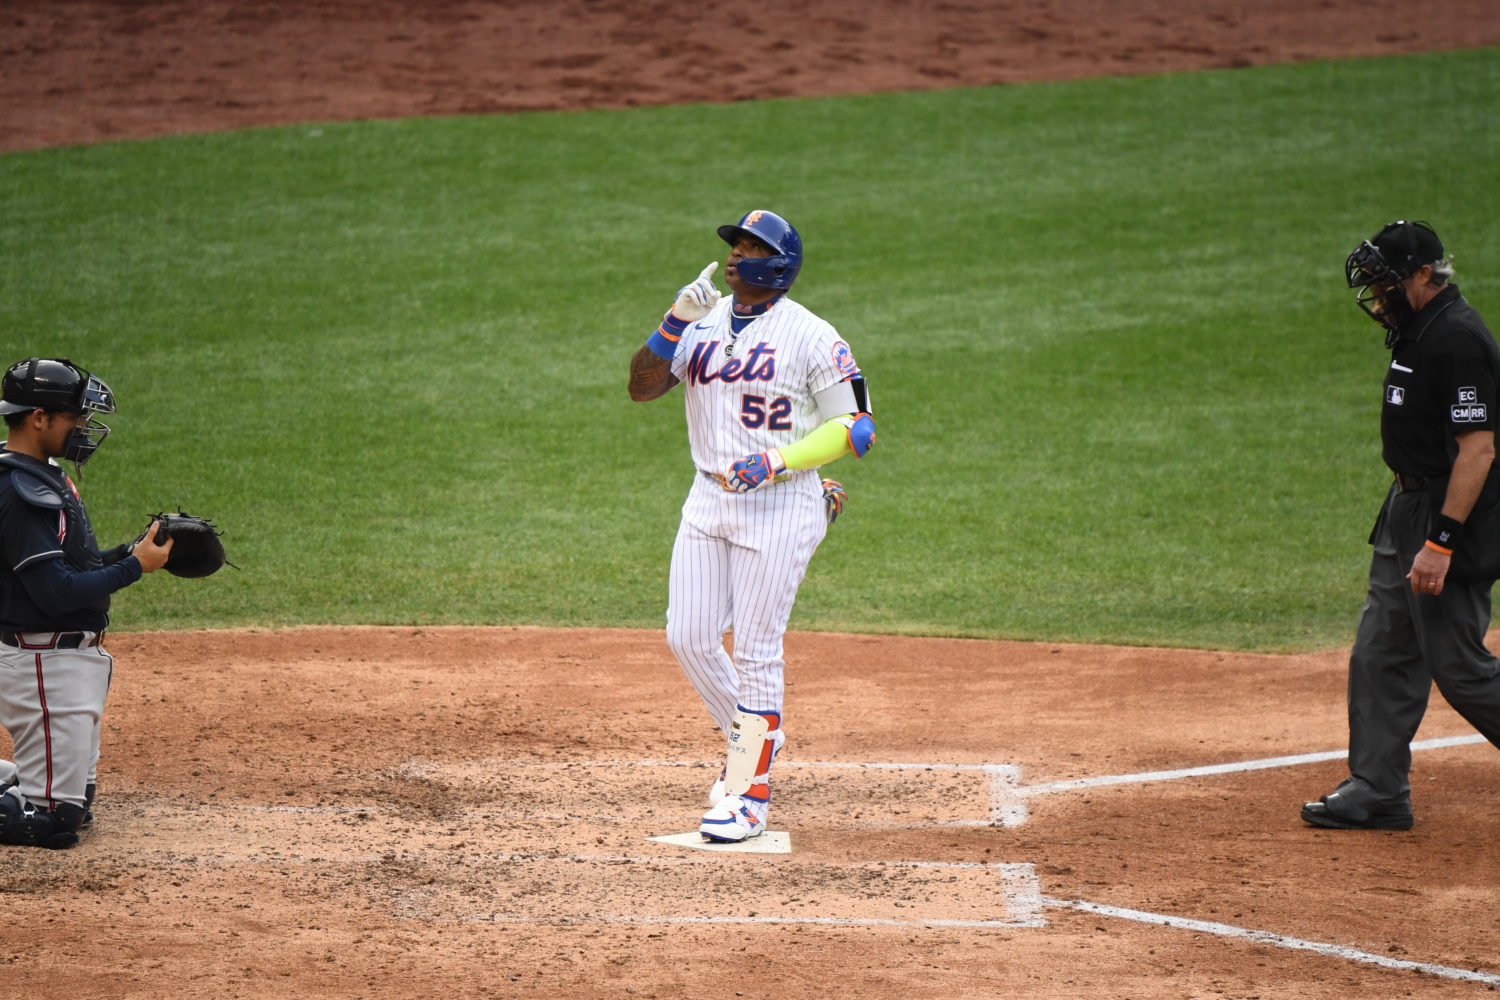 Yoenis Cespedes Crosses Home Plate After His Home Run